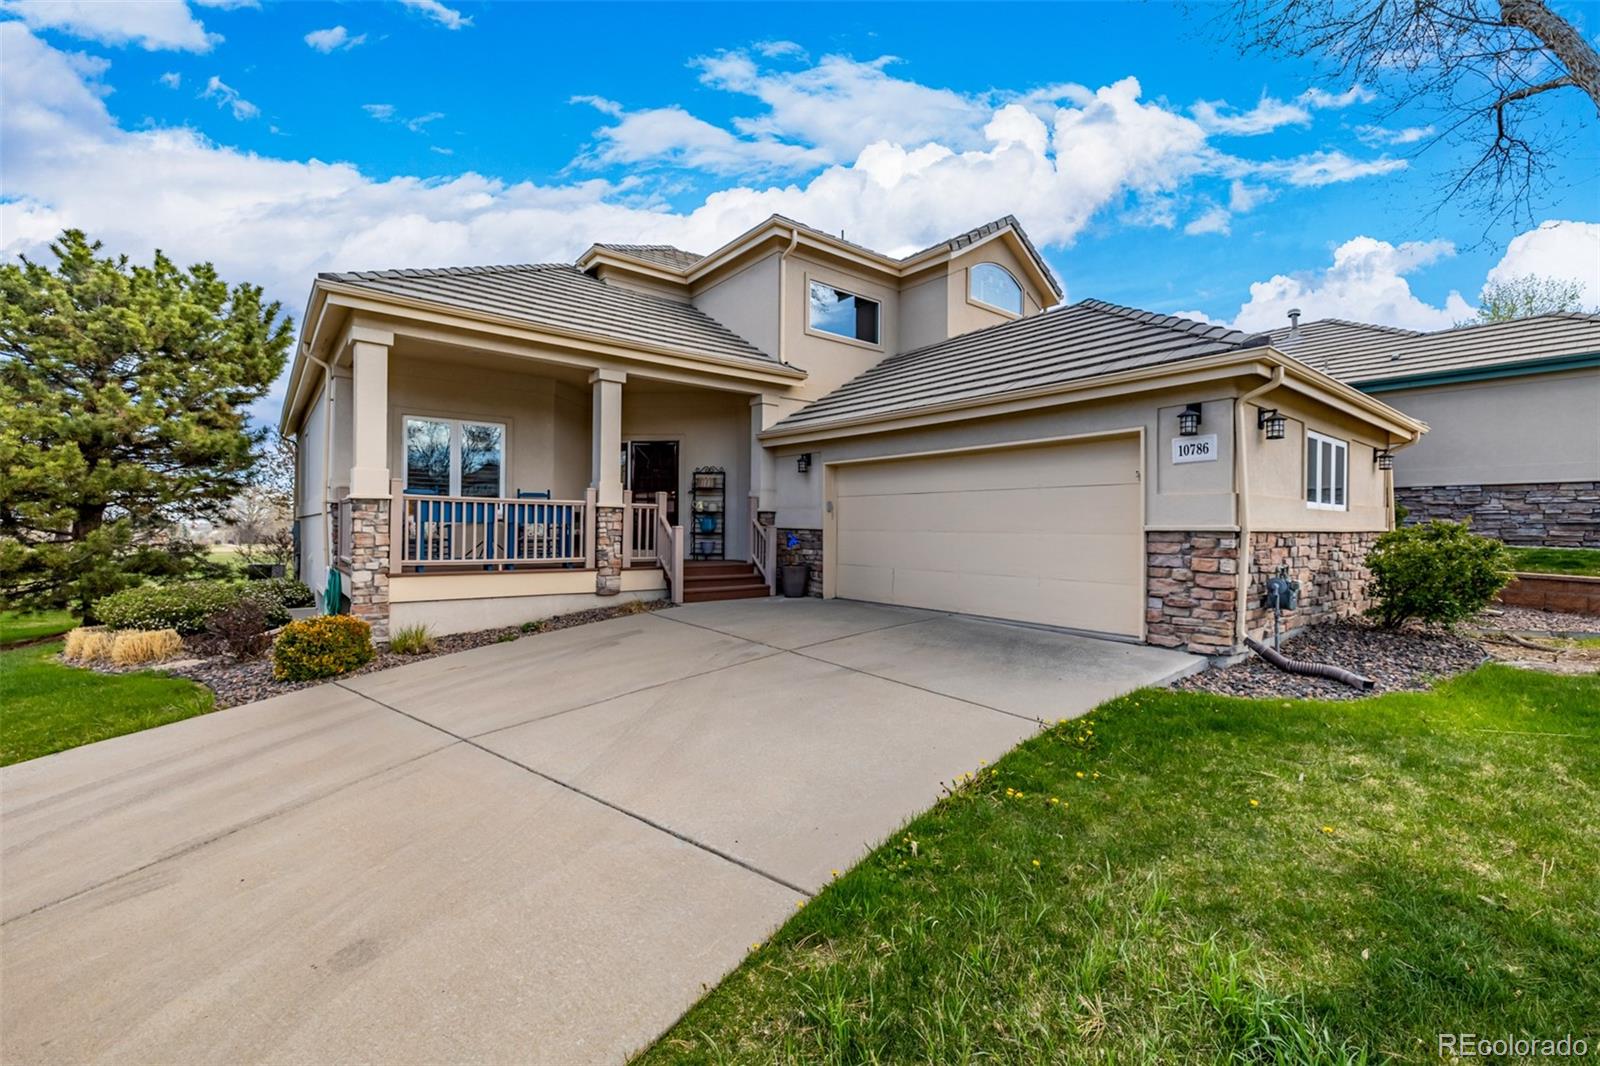 Report Image for 10786  Bryant Court,Westminster, Colorado